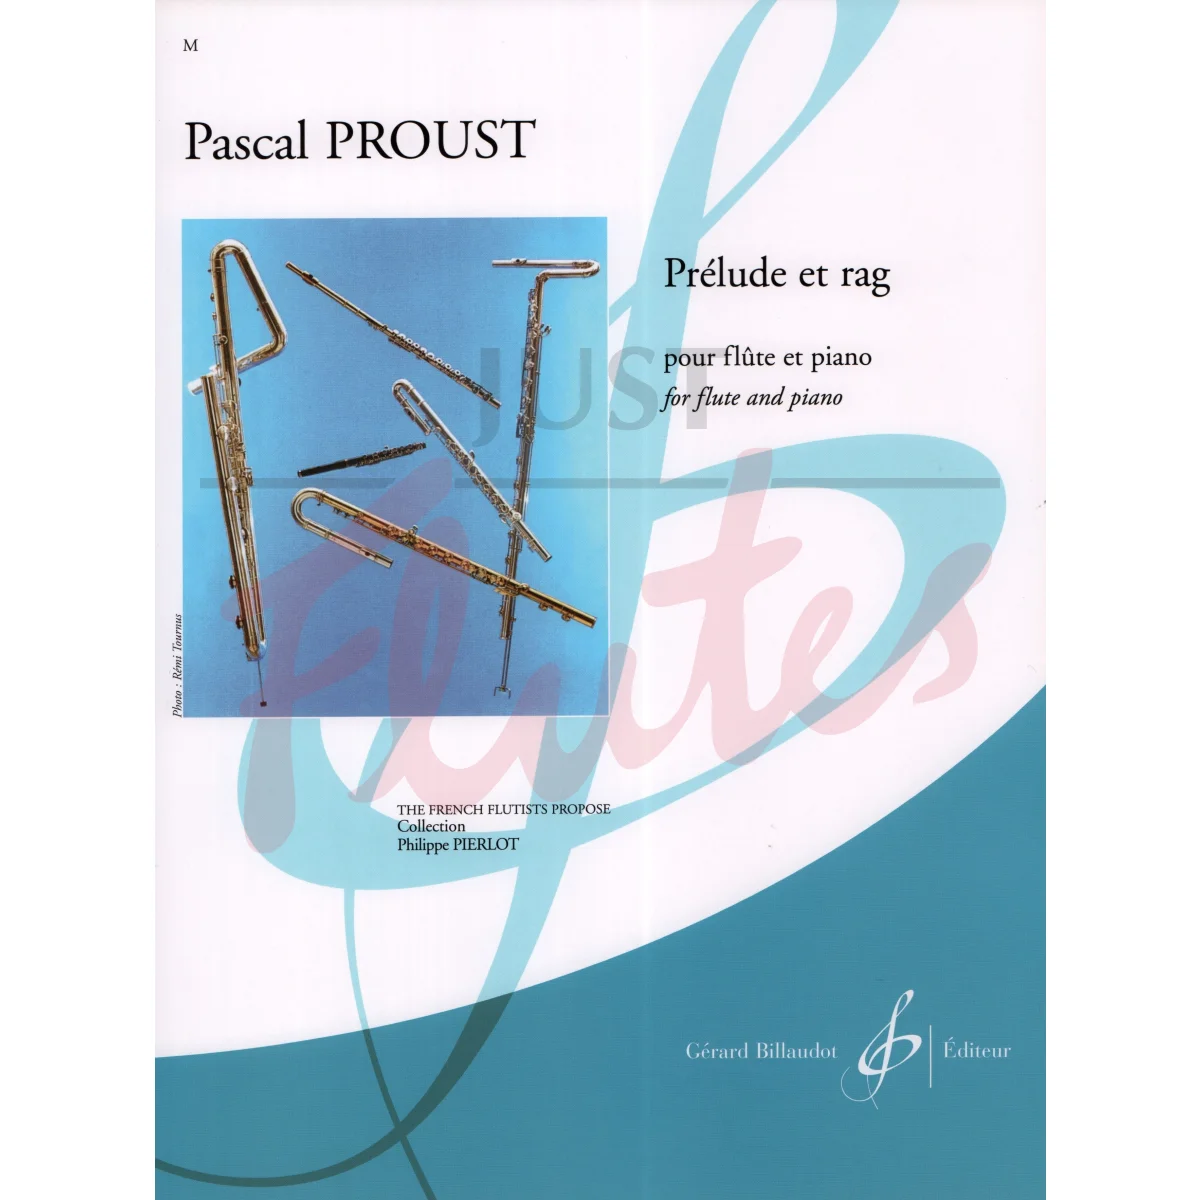 Prelude et Rag for Flute and Piano